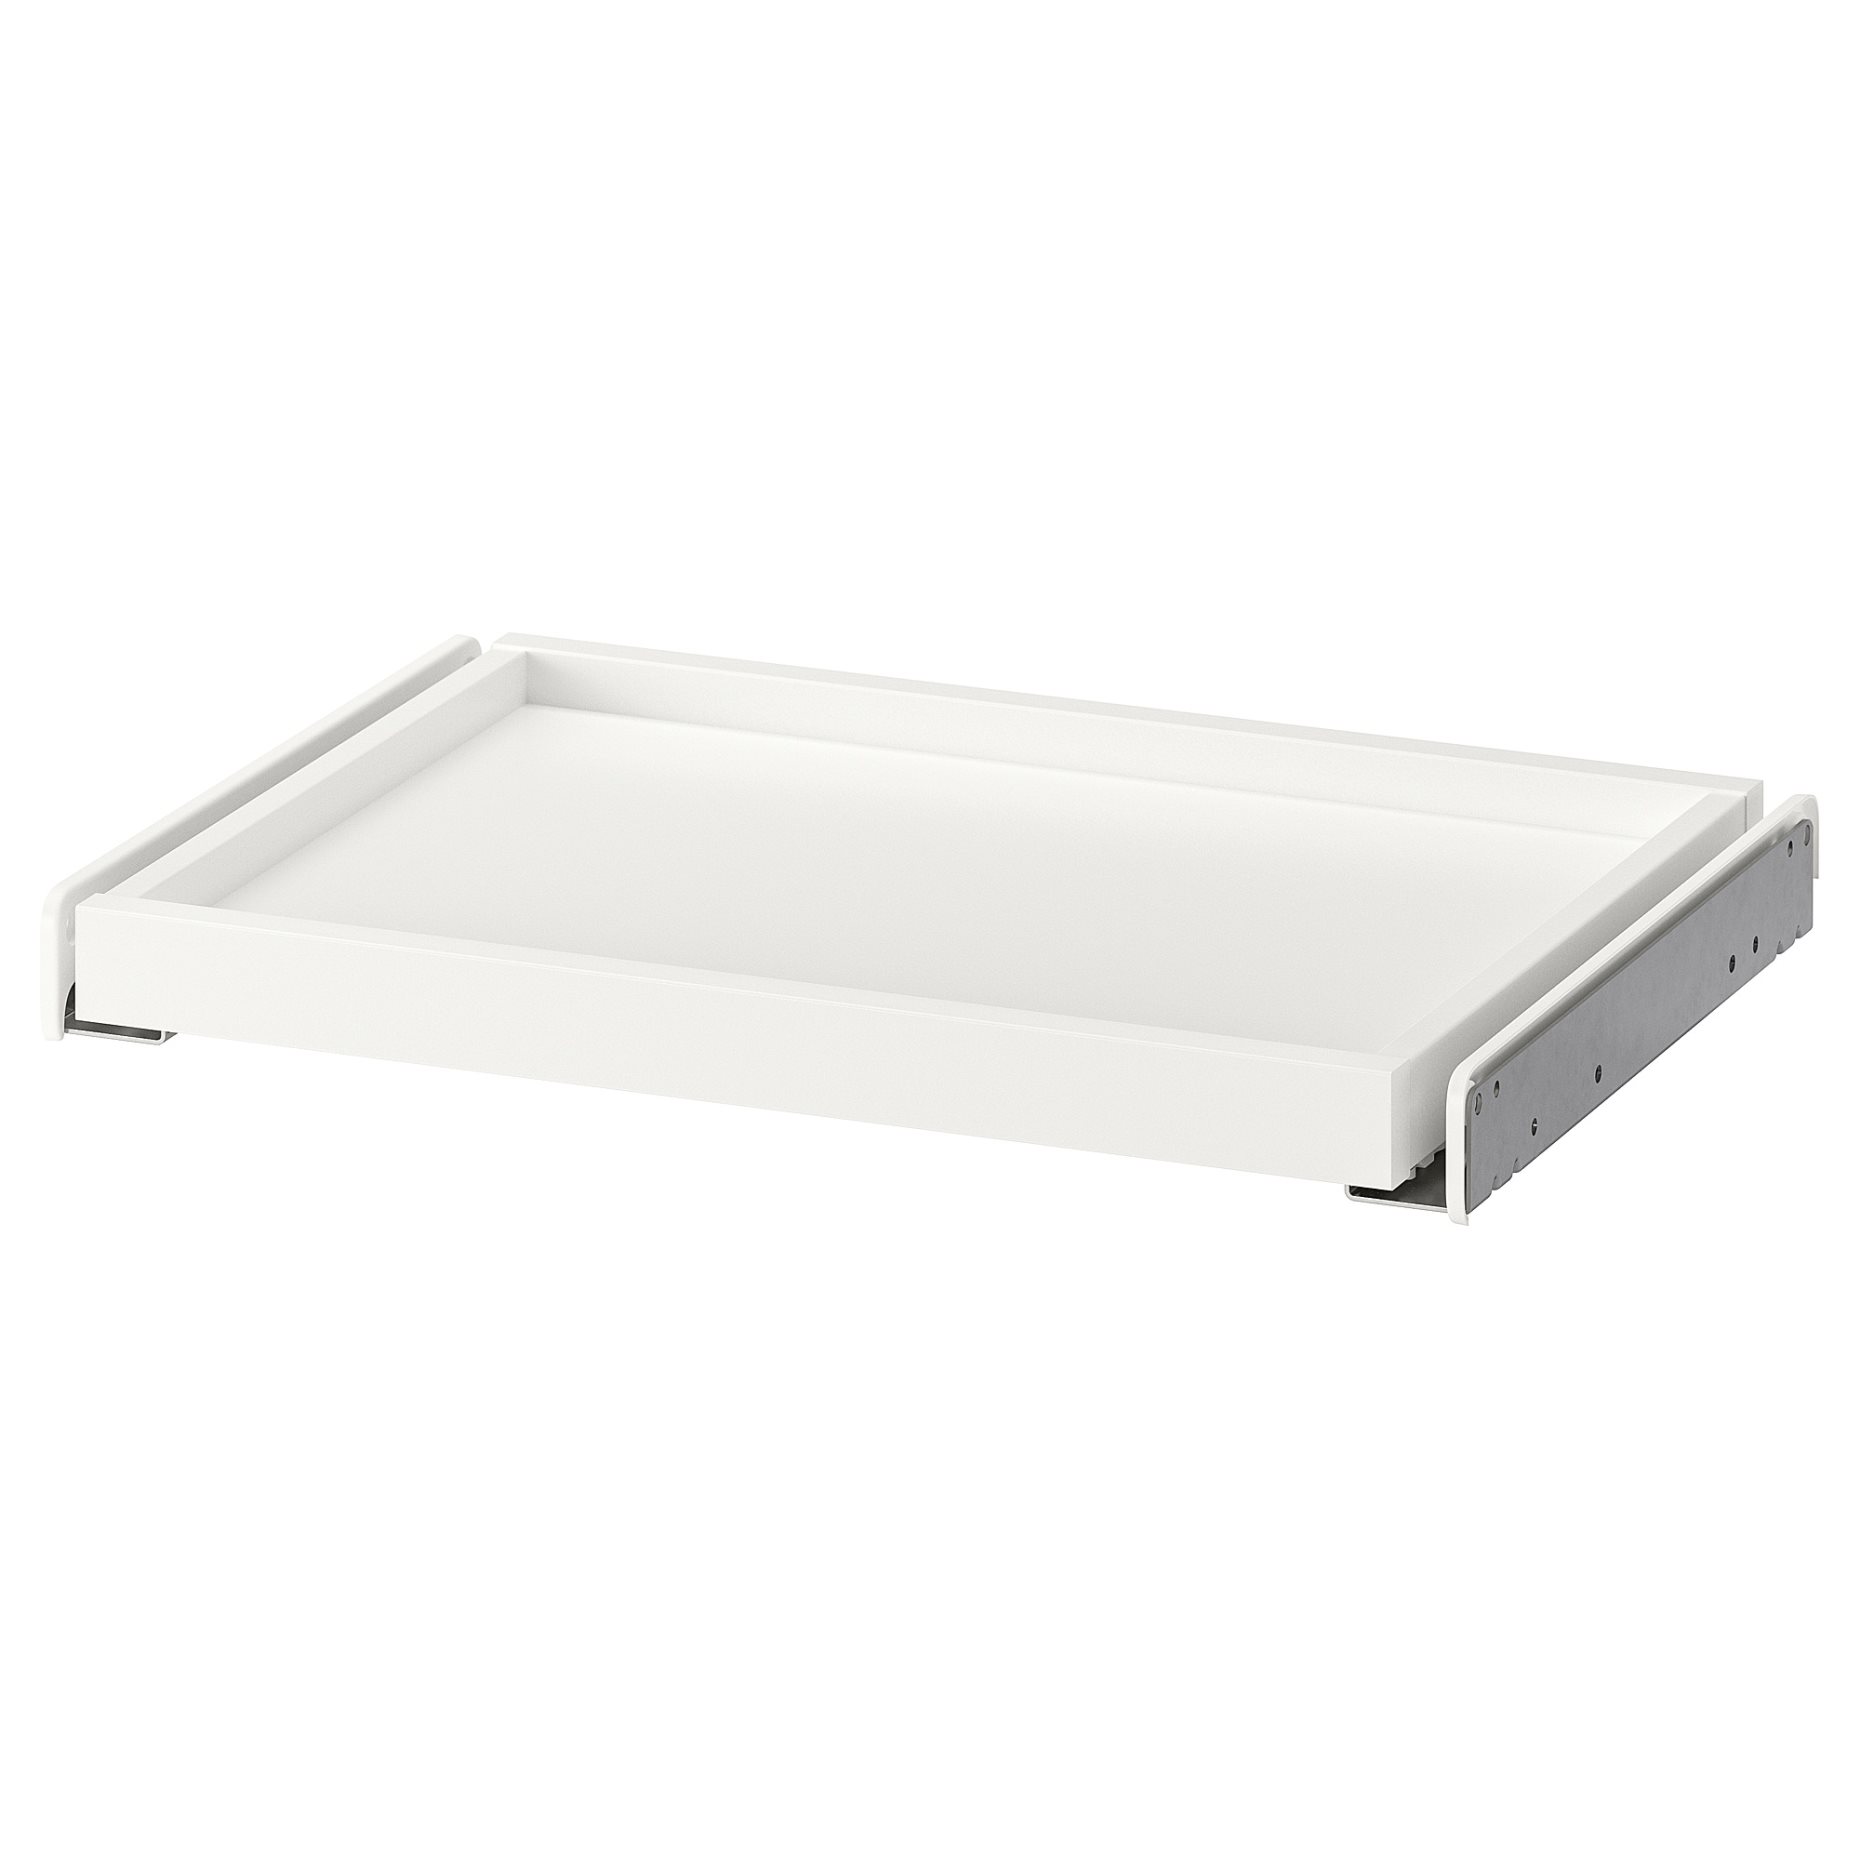 KOMPLEMENT, pull-out tray, 504.339.87